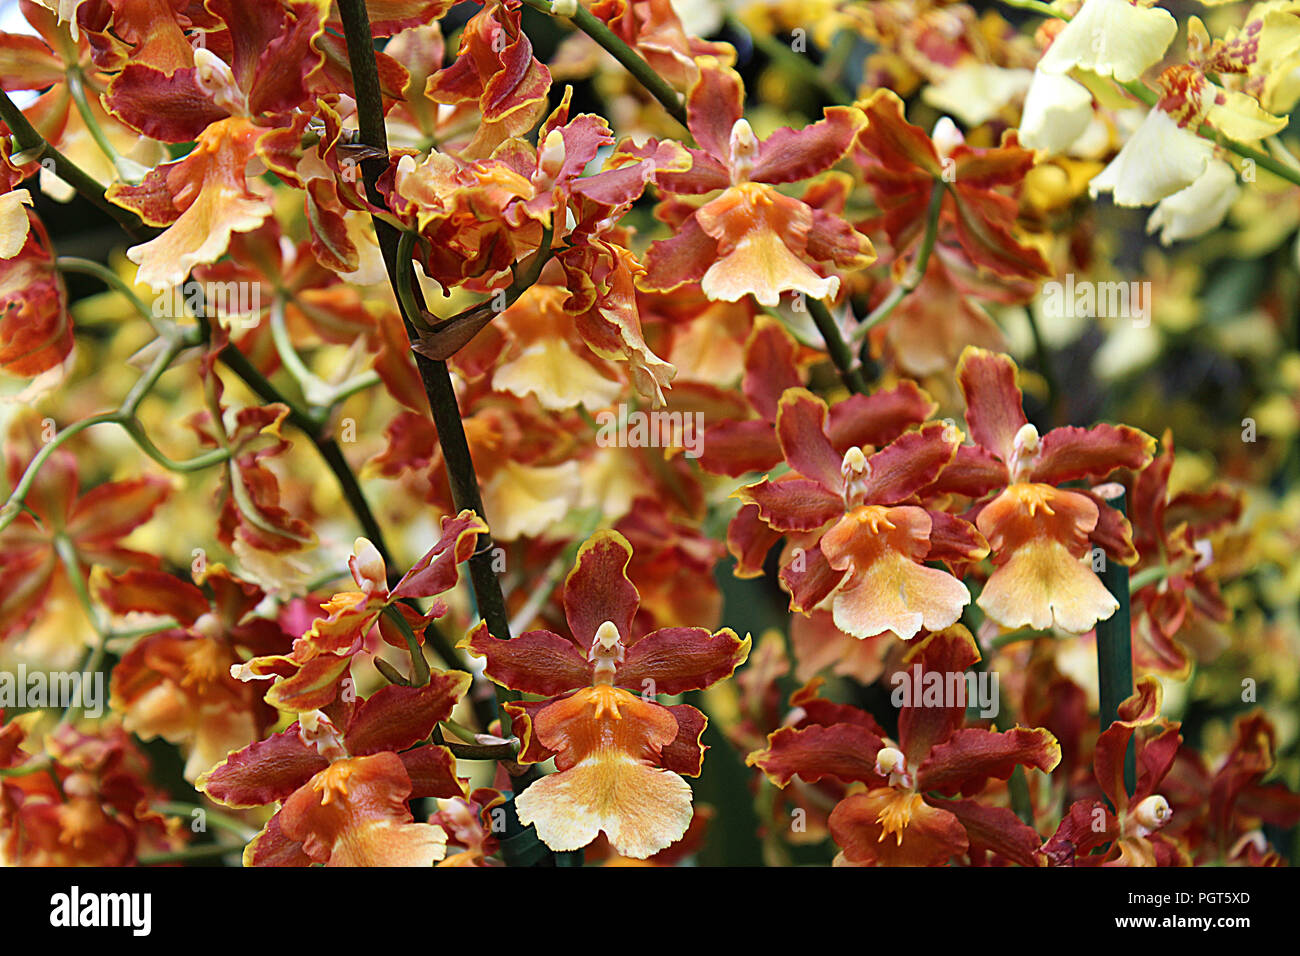 A Cluster Of Blooming Brown Orange And Yellow Oncidium Orchids Stock Photo Alamy